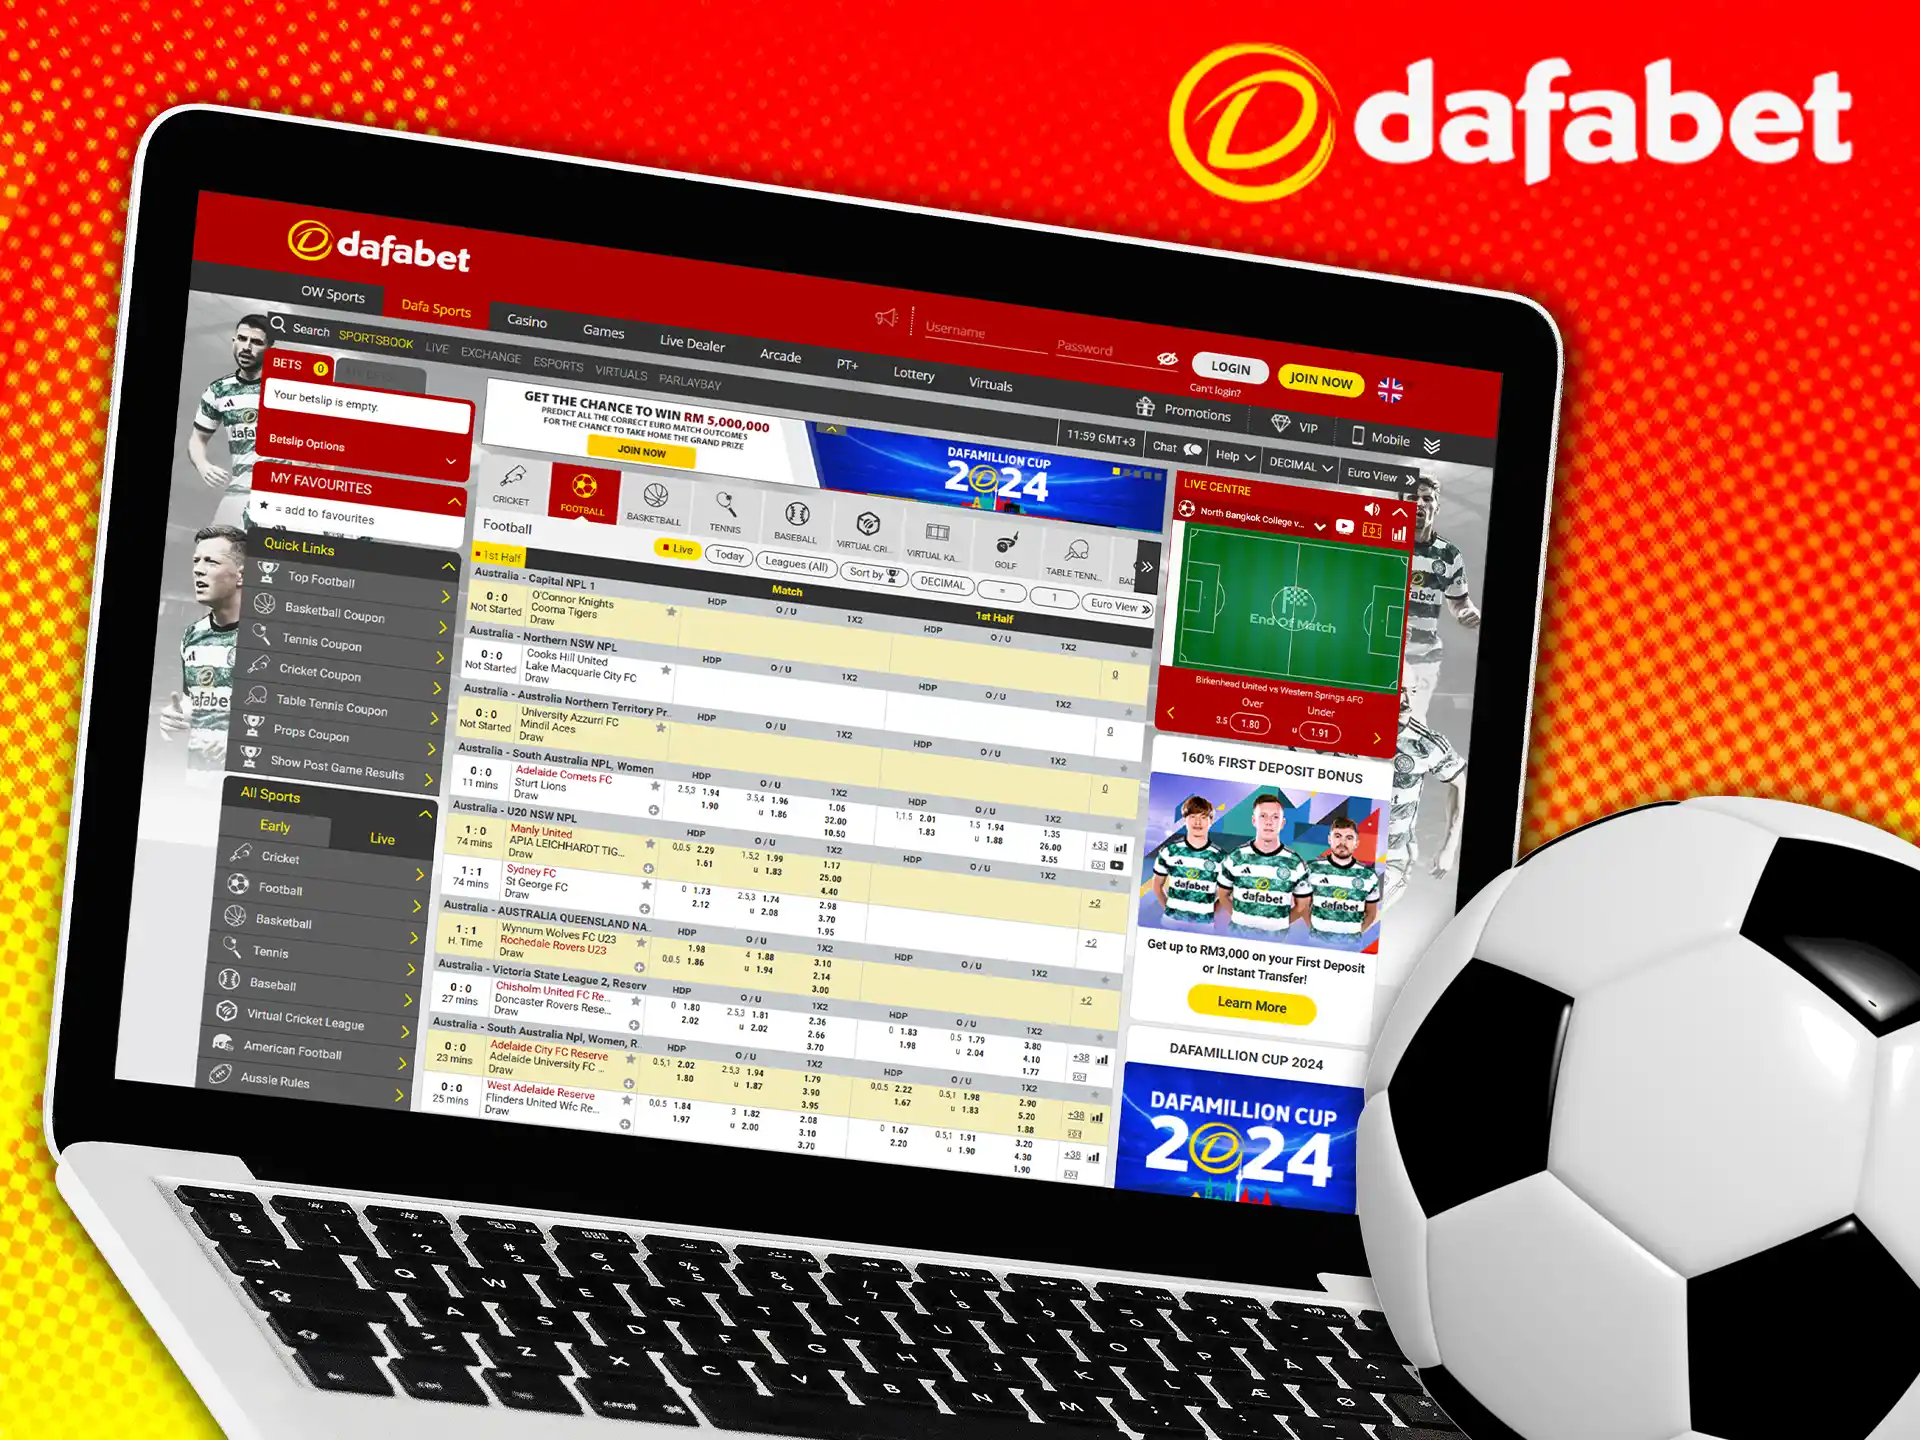 For over 20 years, Dafabet has been providing safe football betting services.